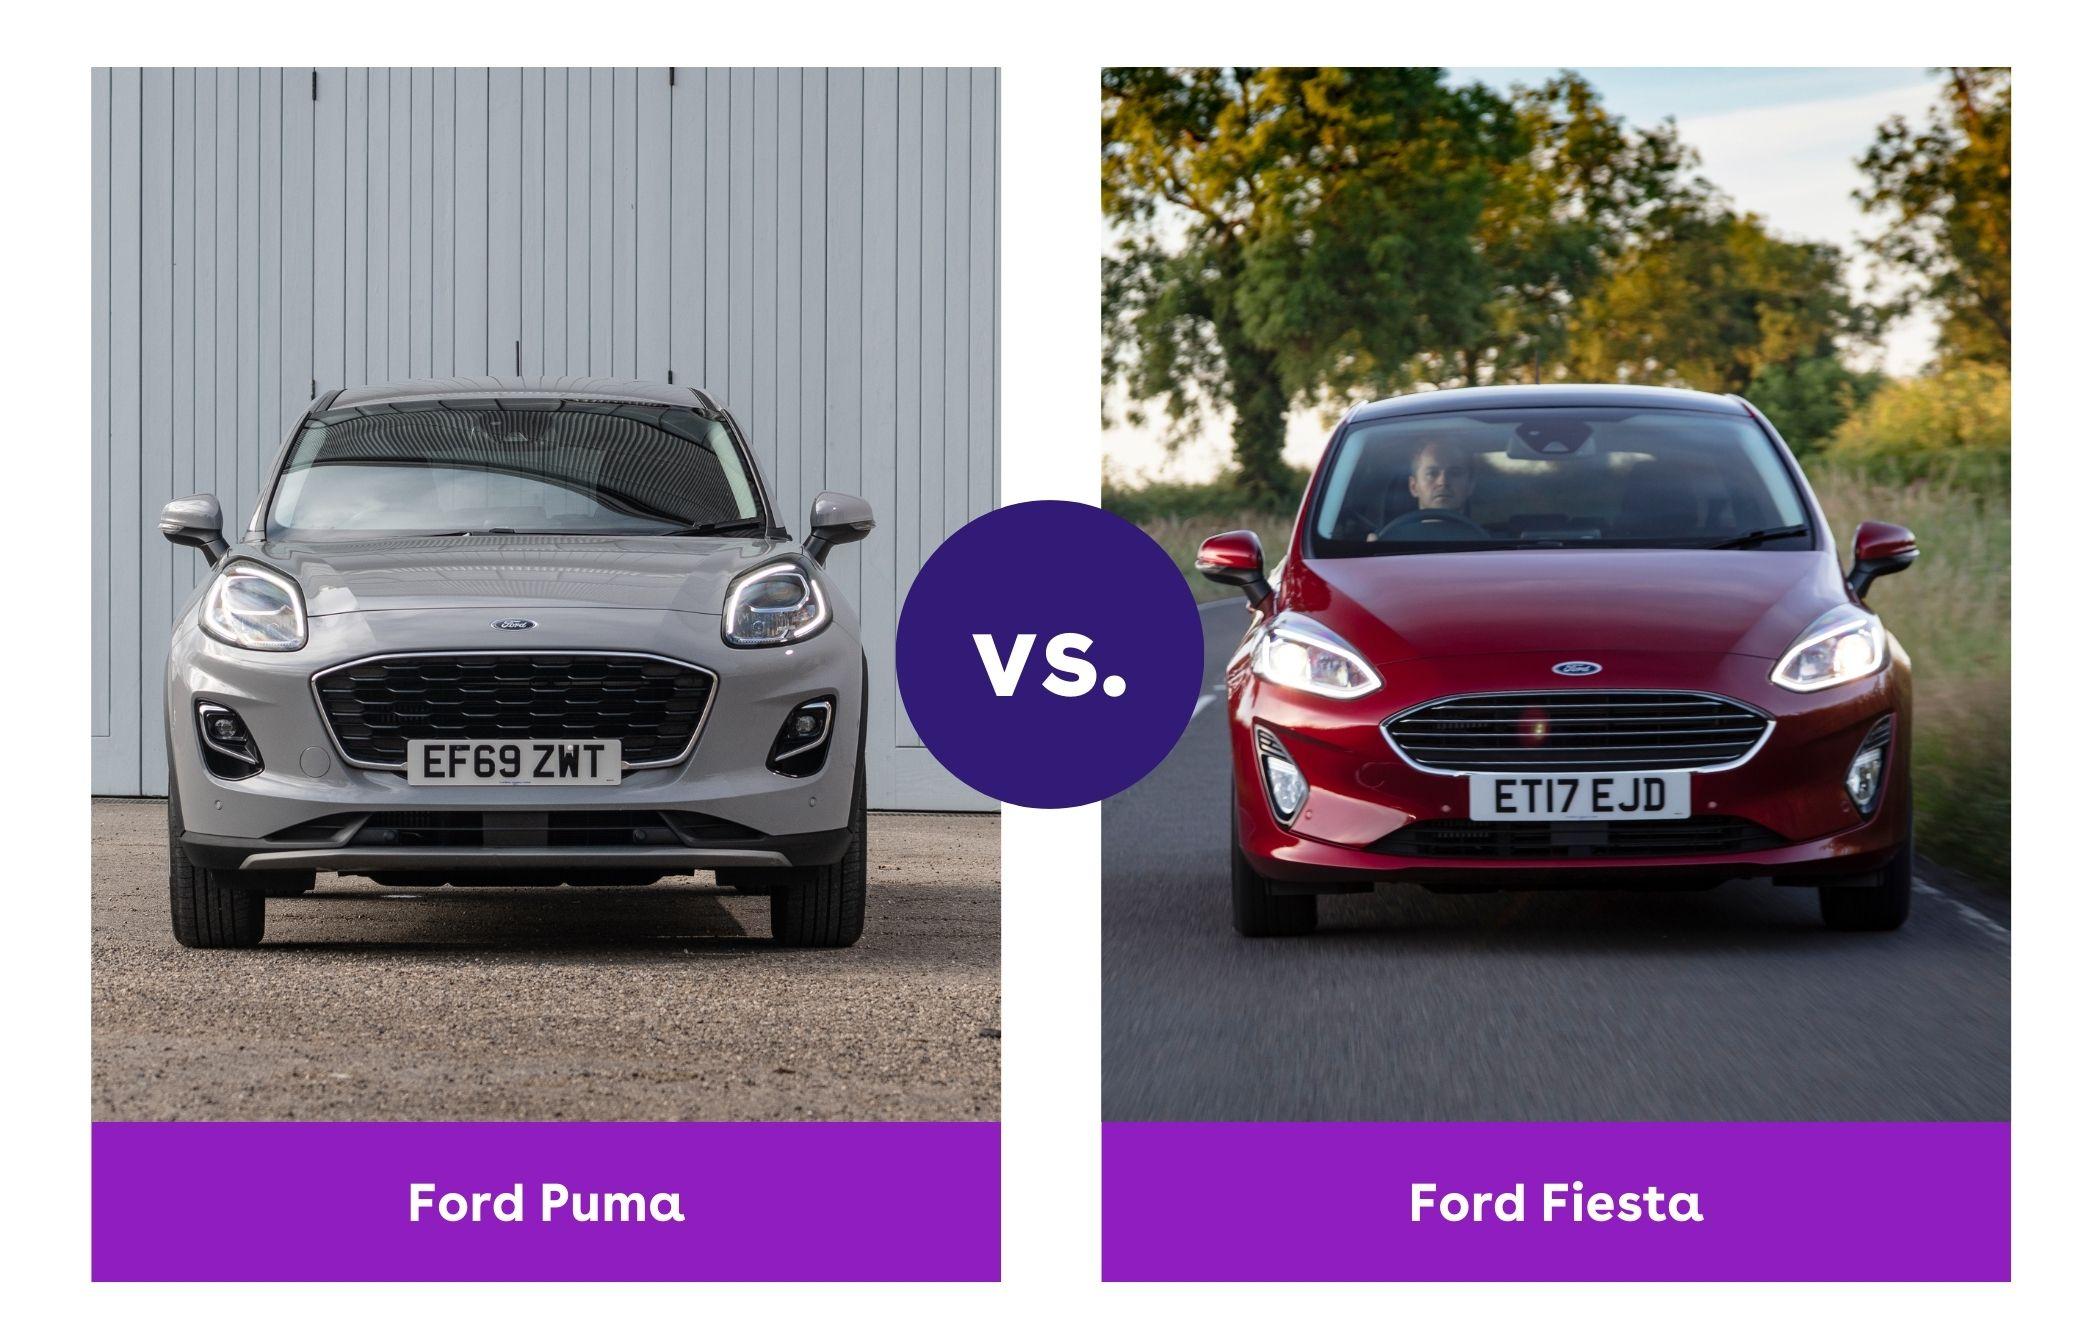 Side-by-side view of Ford Puma and Ford Fiesta